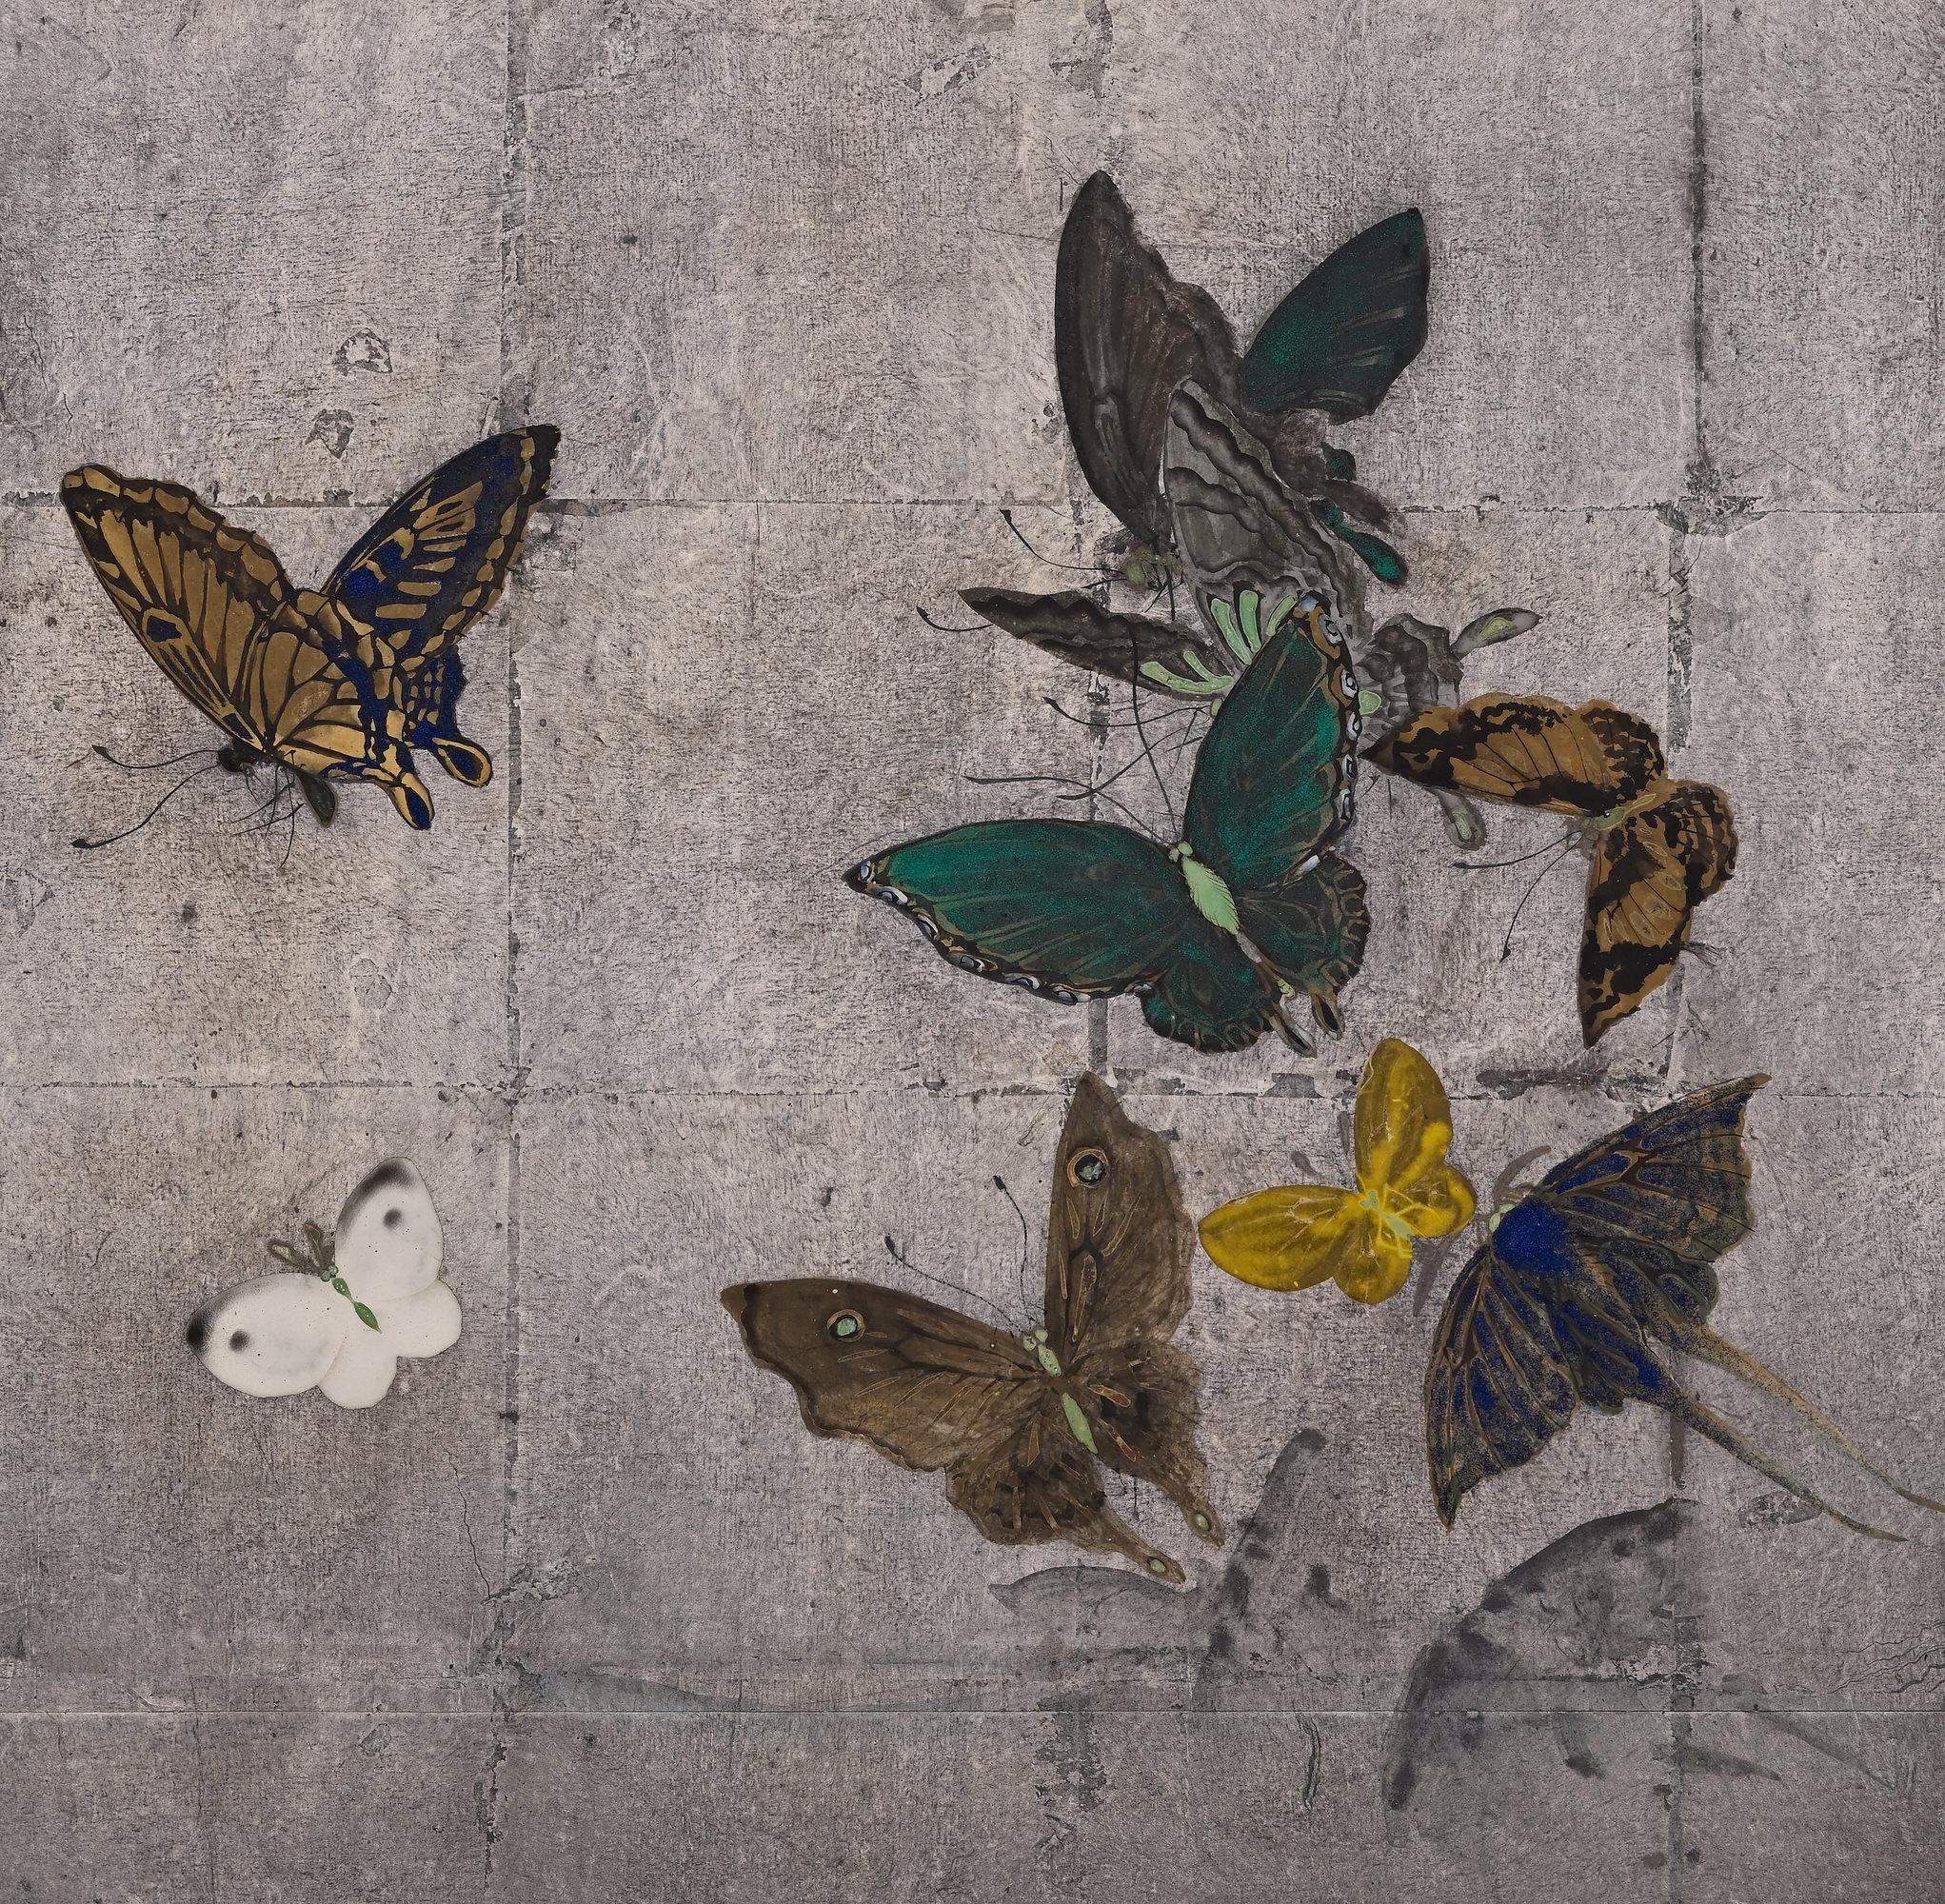 One hundred butterflies

Mori Kansai (1814-1894)

Two-fold Japanese tea-ceremony screen

Ink, gofun, pigment and silver leaf on paper.

Dimensions:

W. 184 cm x H. 59 cm (72.5” x 23”)

Presented here is a Japanese tea-ceremony screen